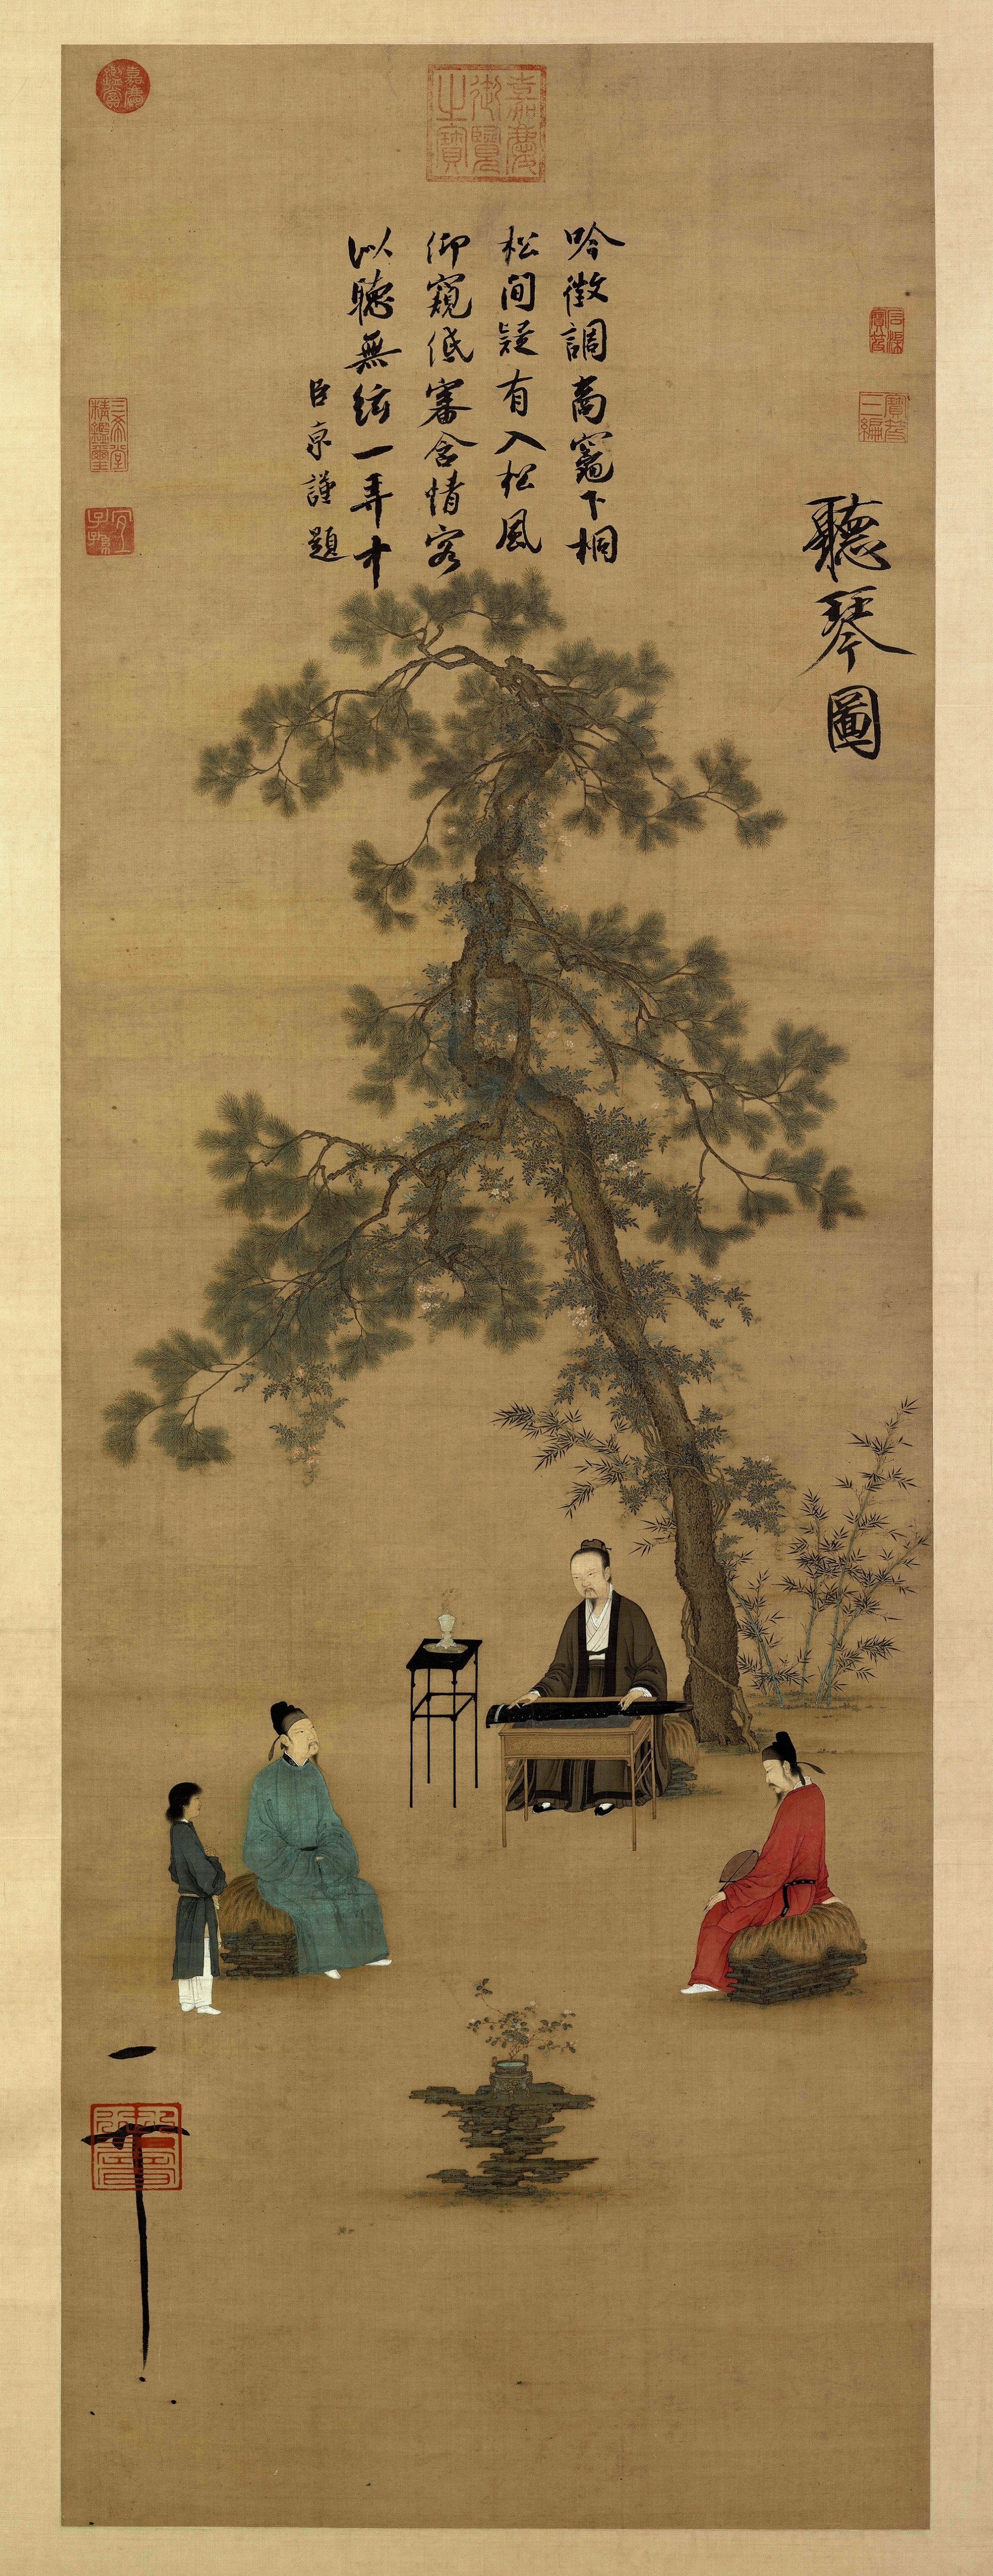 Listening to the Qin by Emperor Huizong (1082-1135) of the Northern Song Dynasty